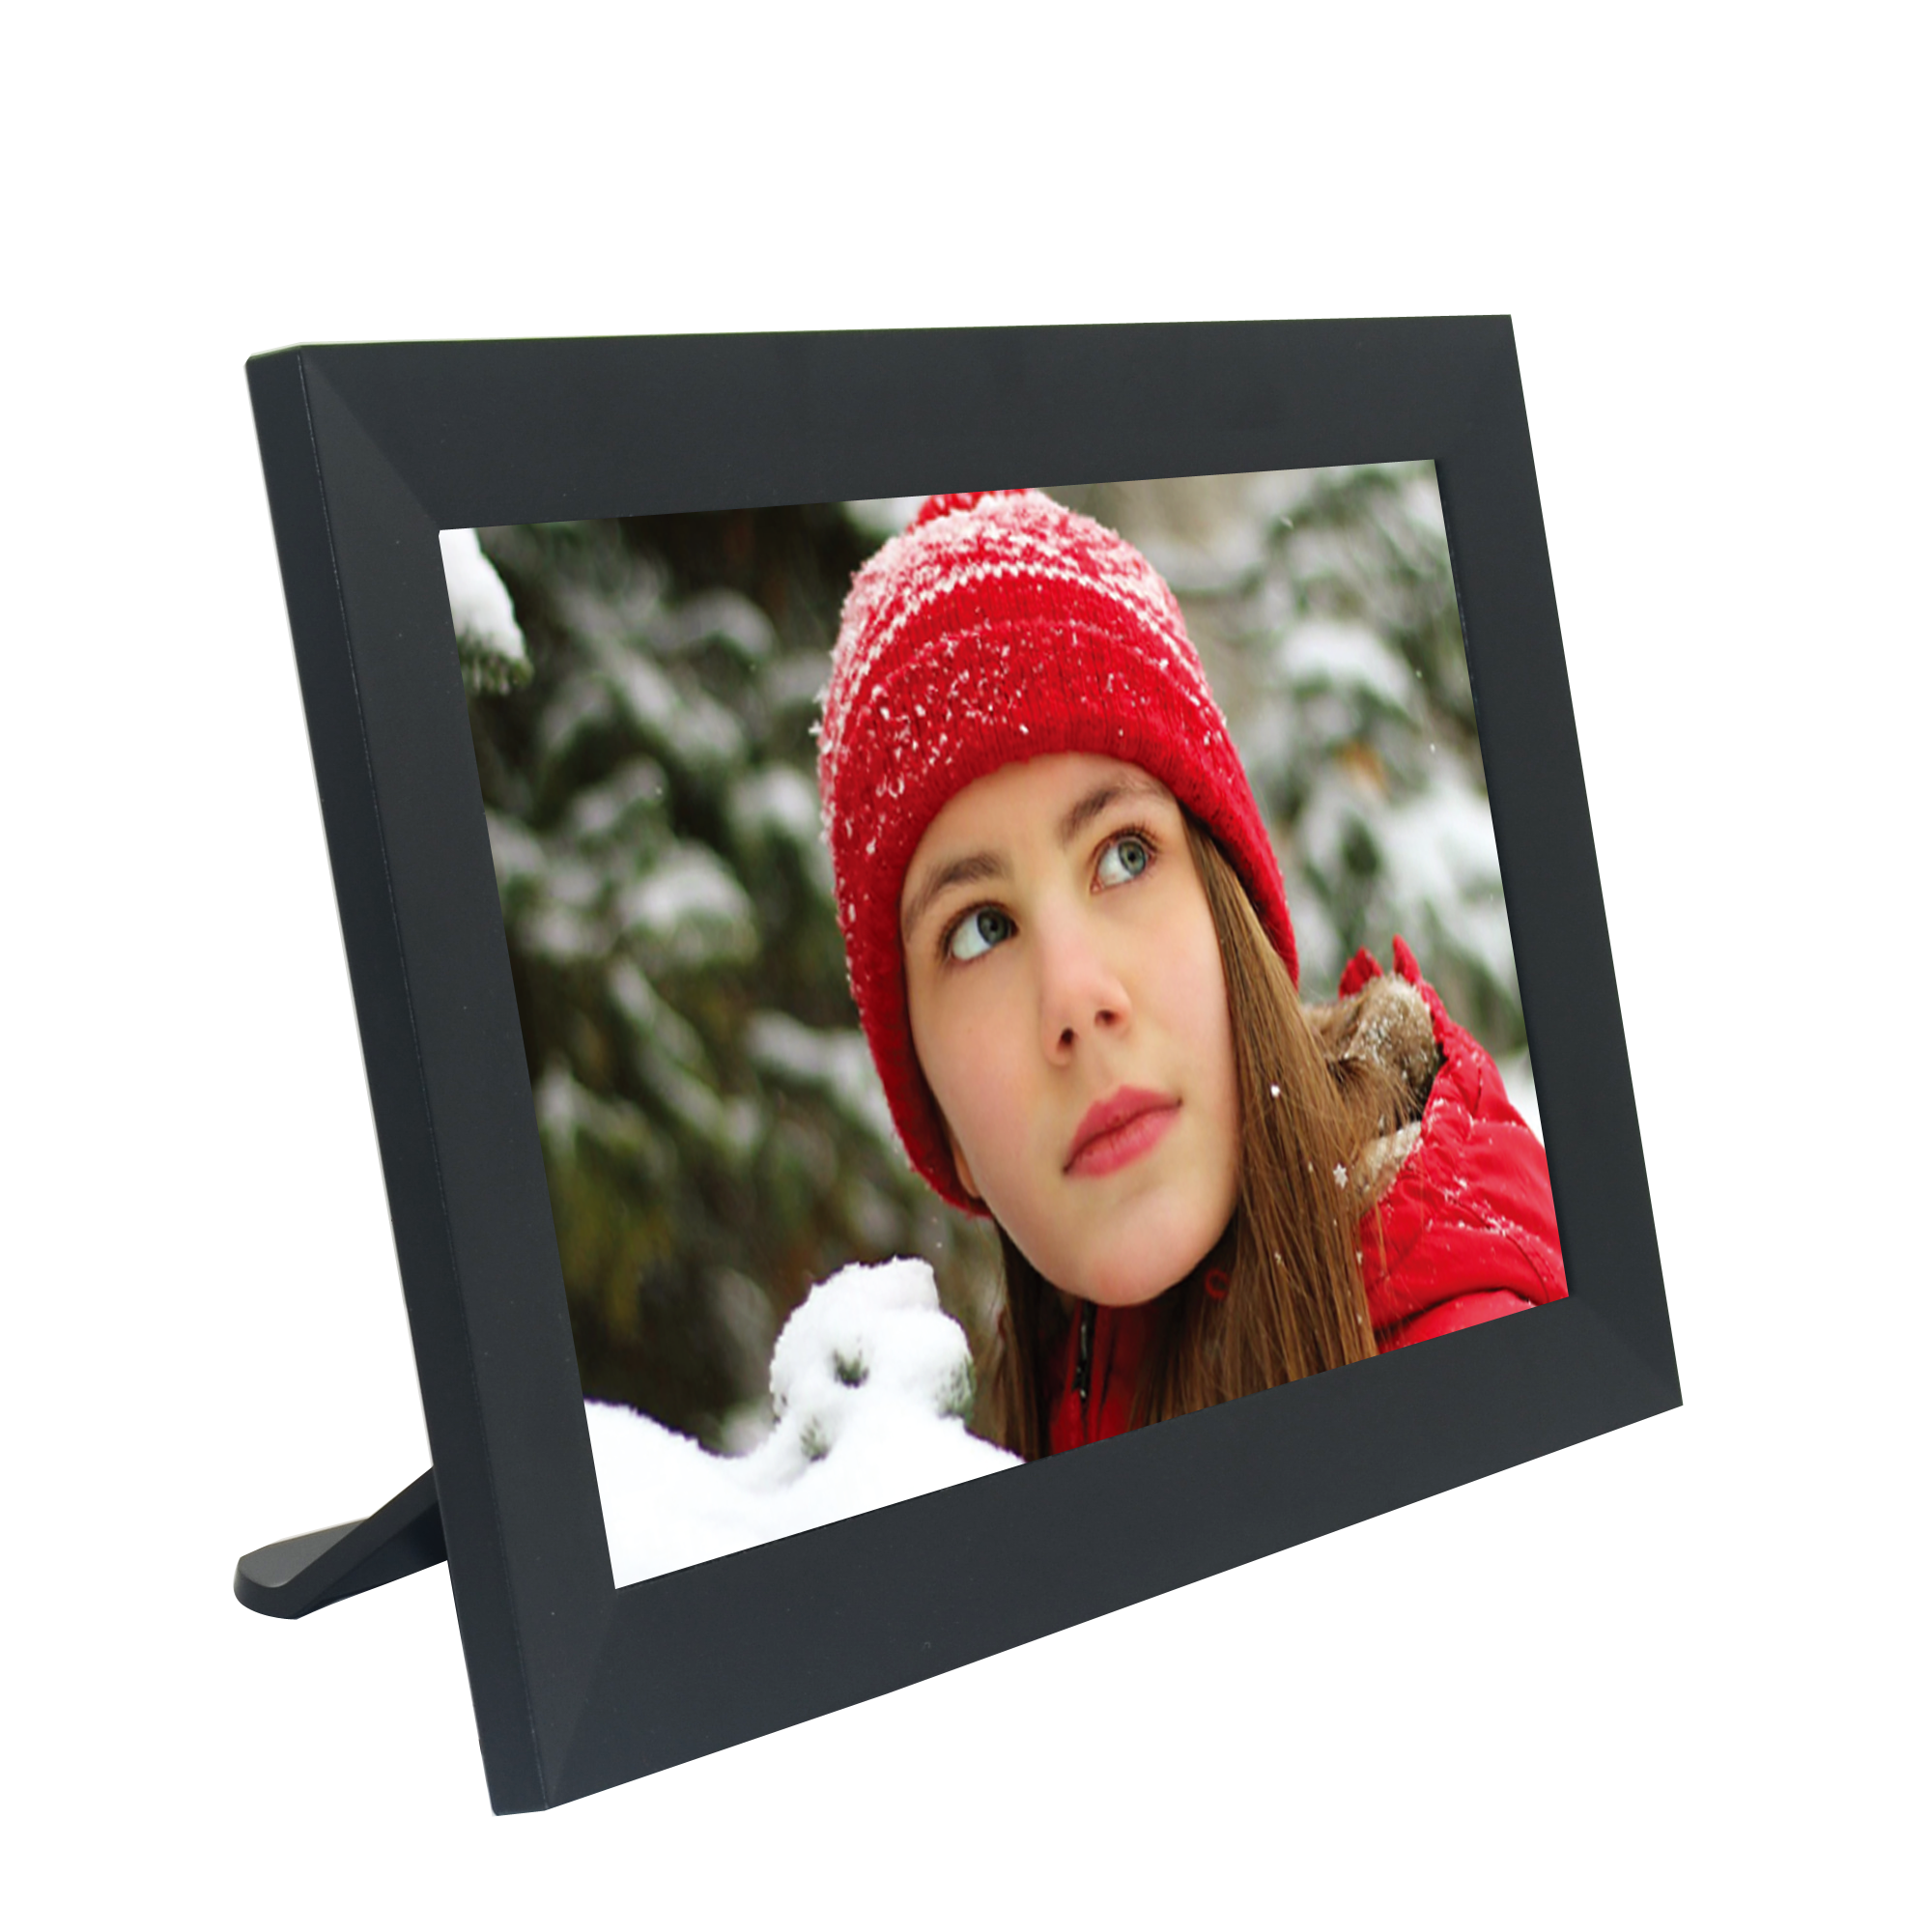 Sylvania, 10 in. Wi-Fi Frameo APP Control Digital Cloud Picture Frame, SDPF1096 - image 3 of 9